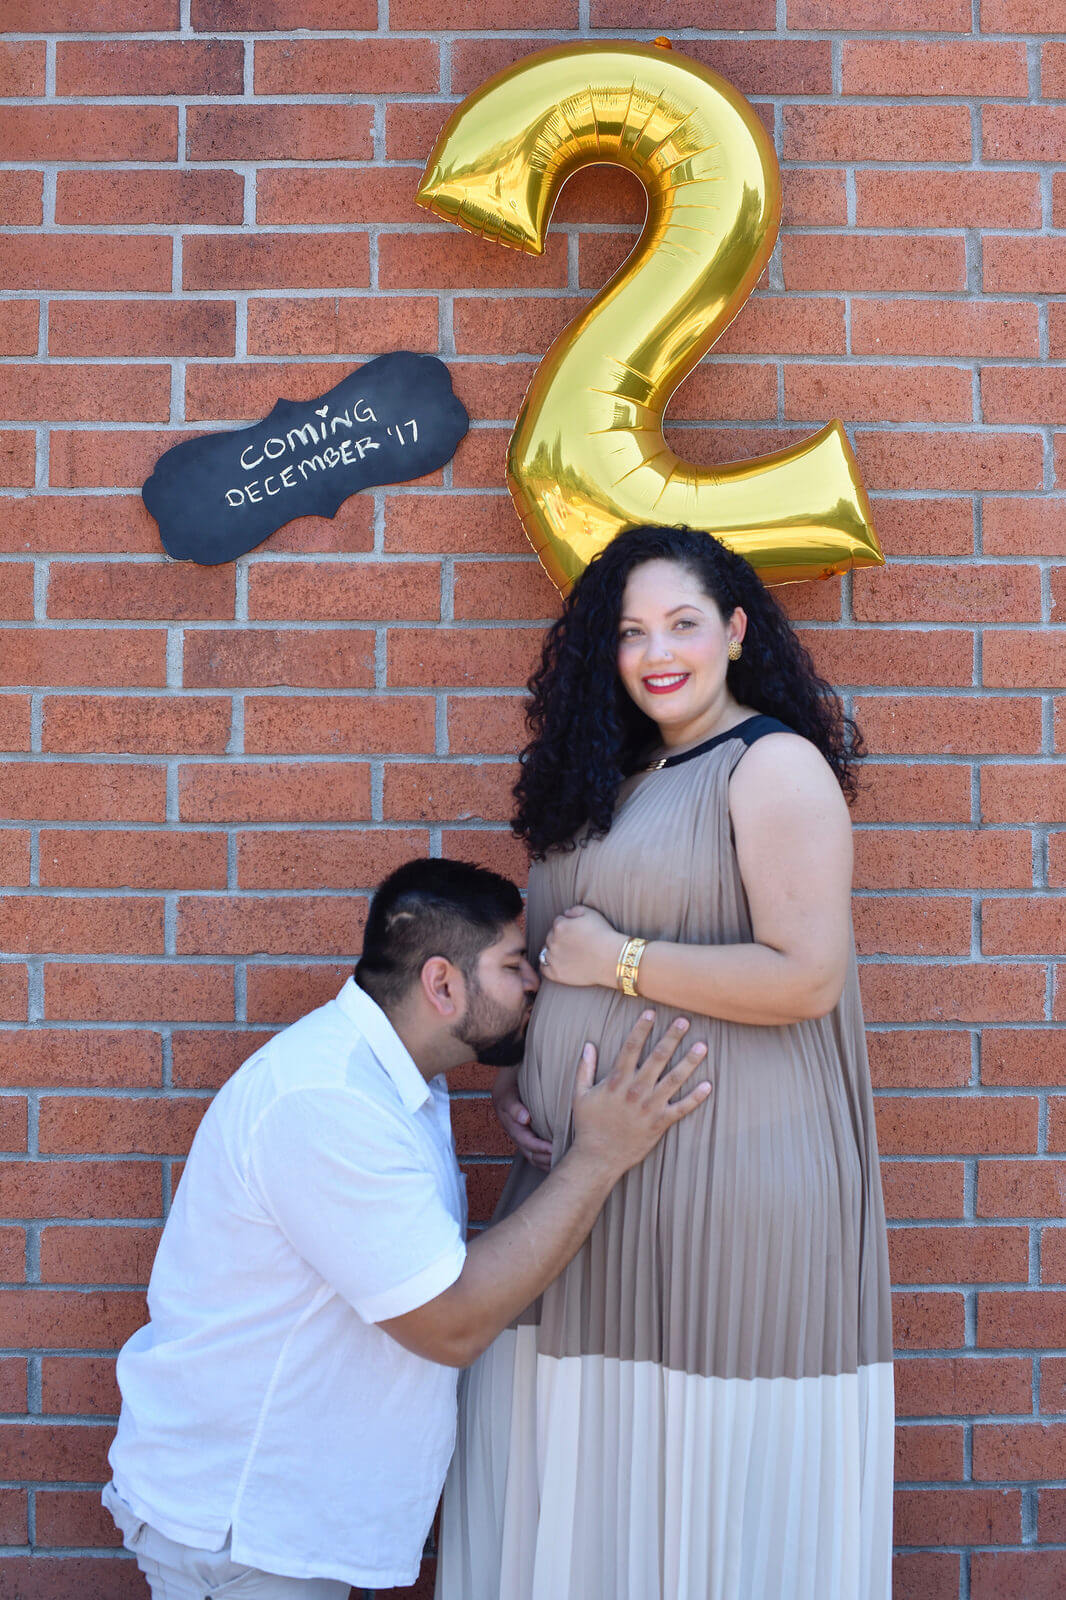 Girl With Curves founder Tanesha Awasthi announcing her pregnancy with baby #2